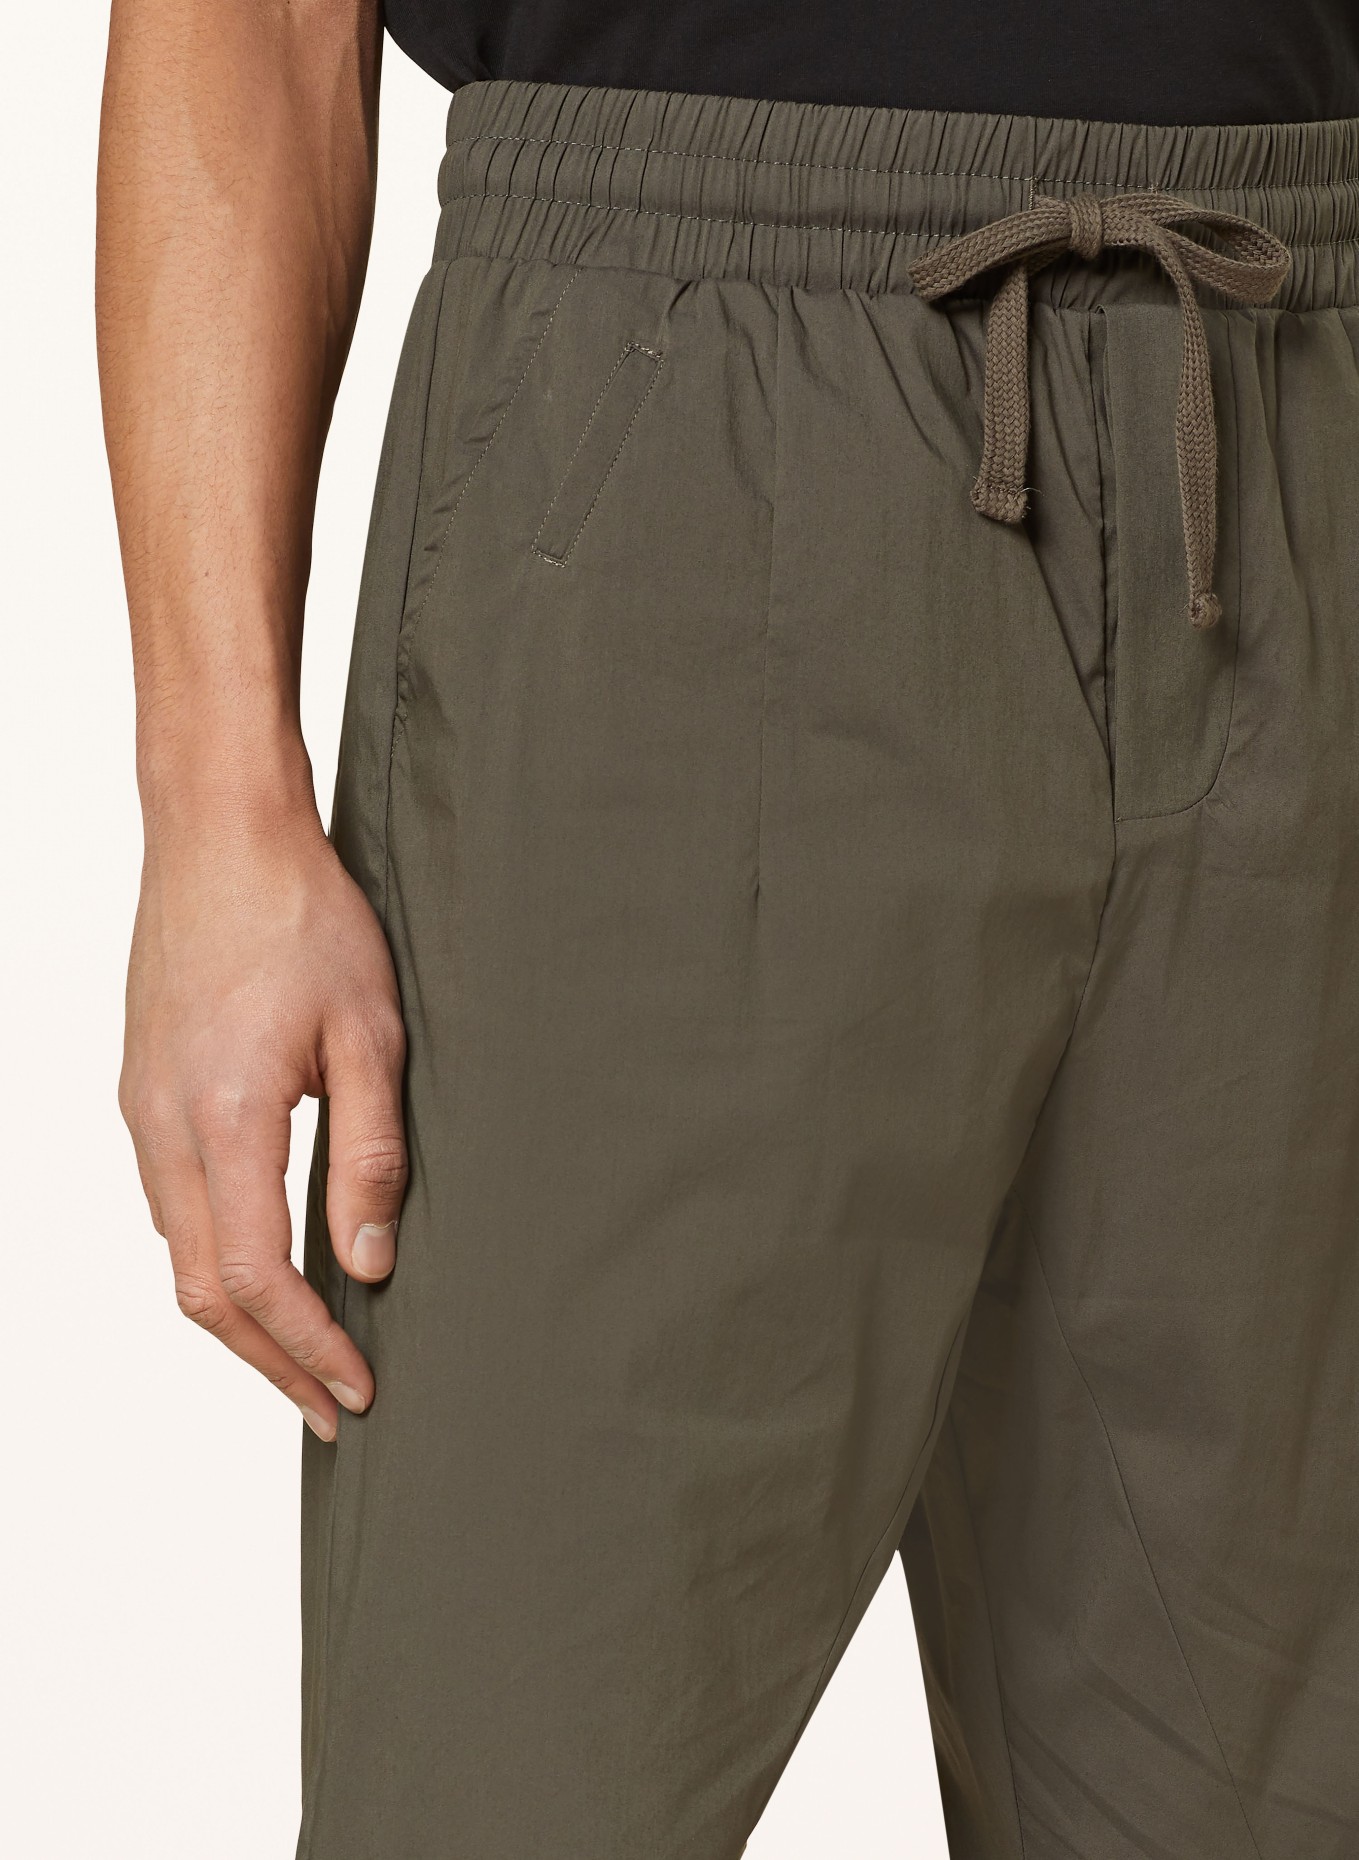 thom/krom Pants in jogger style slim fit, Color: KHAKI (Image 5)